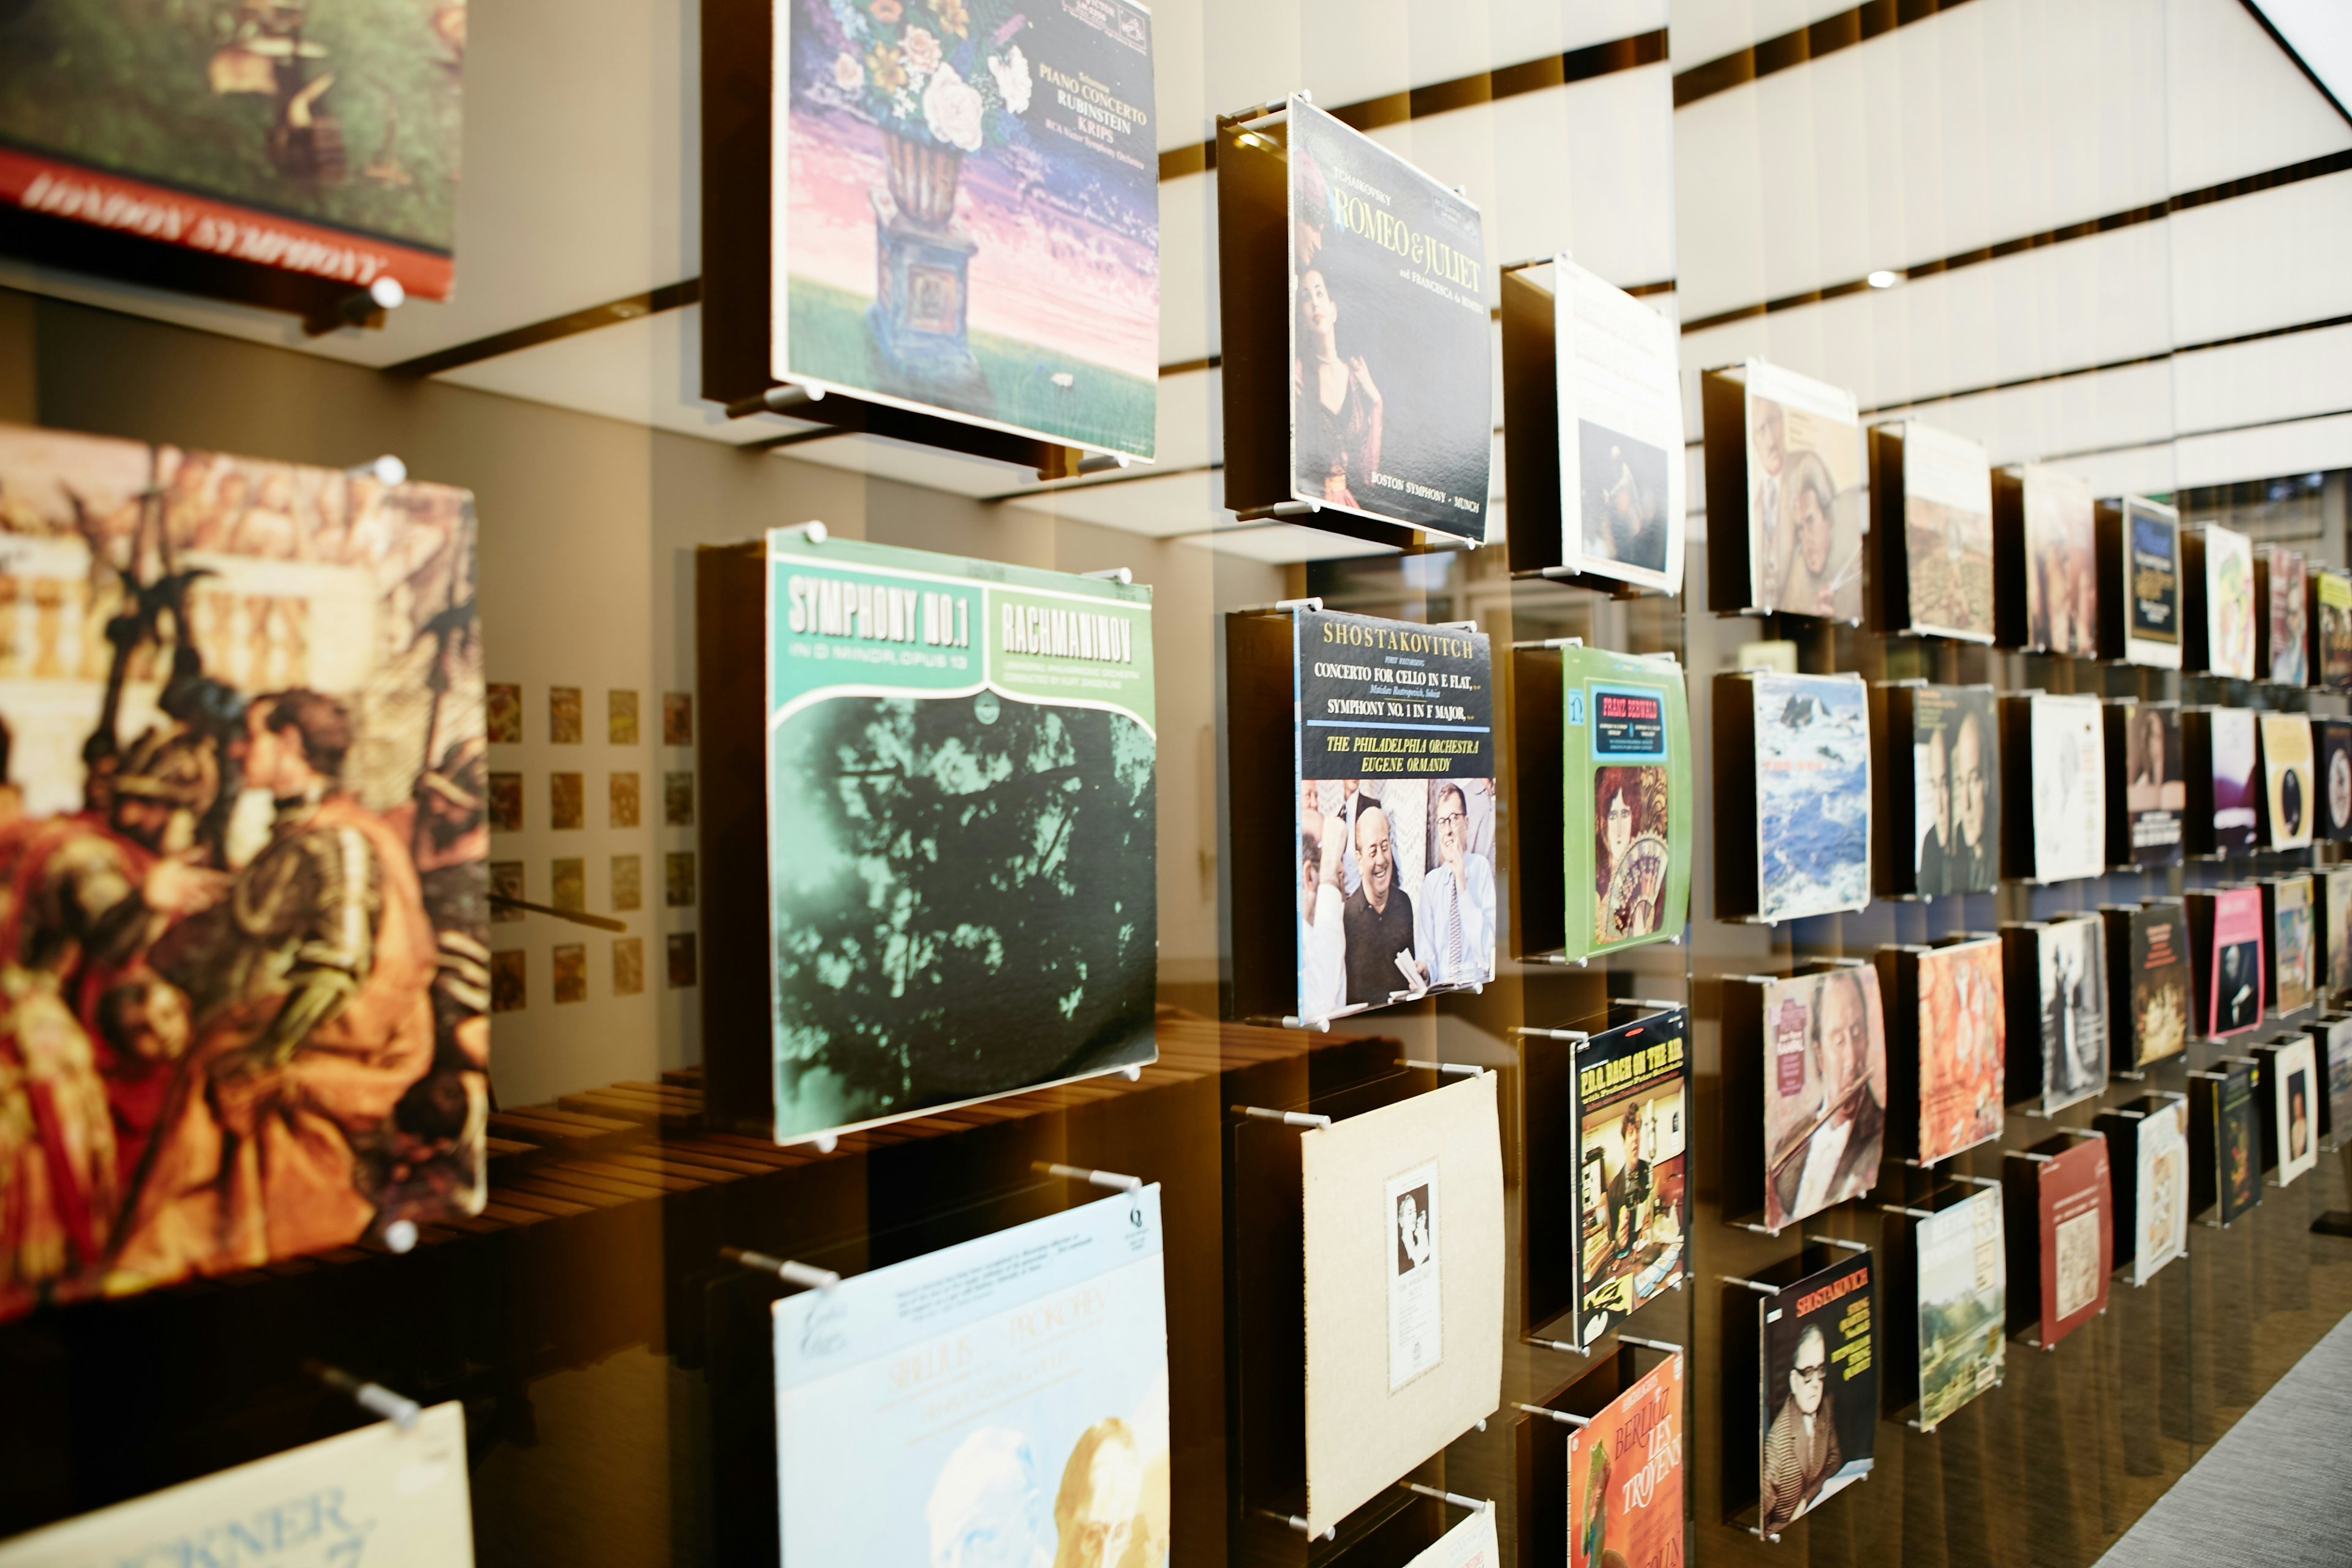 Polyphony's classical music record collection is displayed for in-store enjoyment, but isn't for sale. (Courtesy Photo)